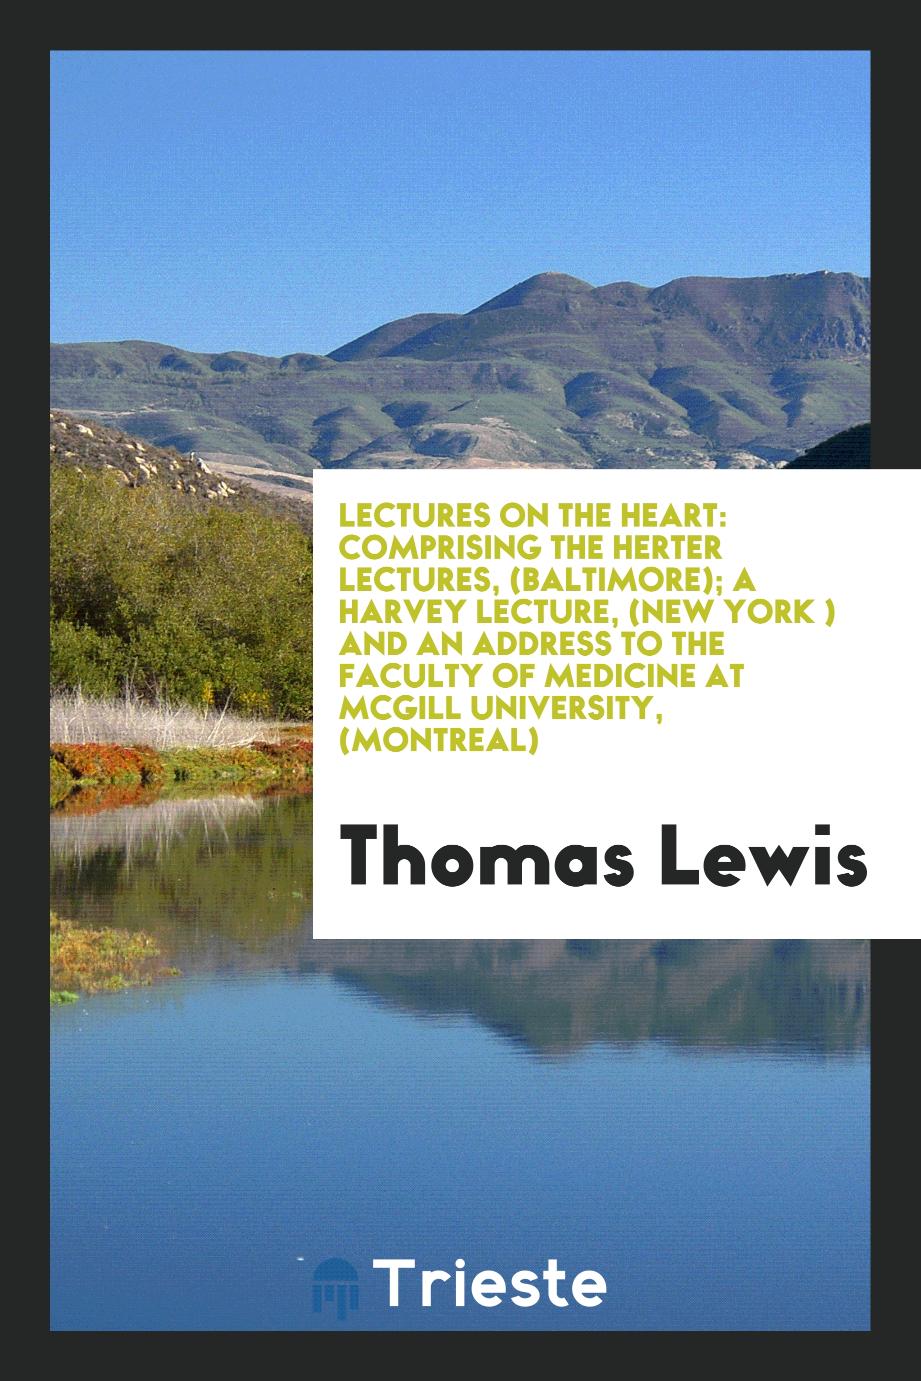 Lectures on the Heart: Comprising the Herter Lectures, (Baltimore); A Harvey Lecture, (New York ) and an Address to the Faculty of Medicine at McGill University, (Montreal)